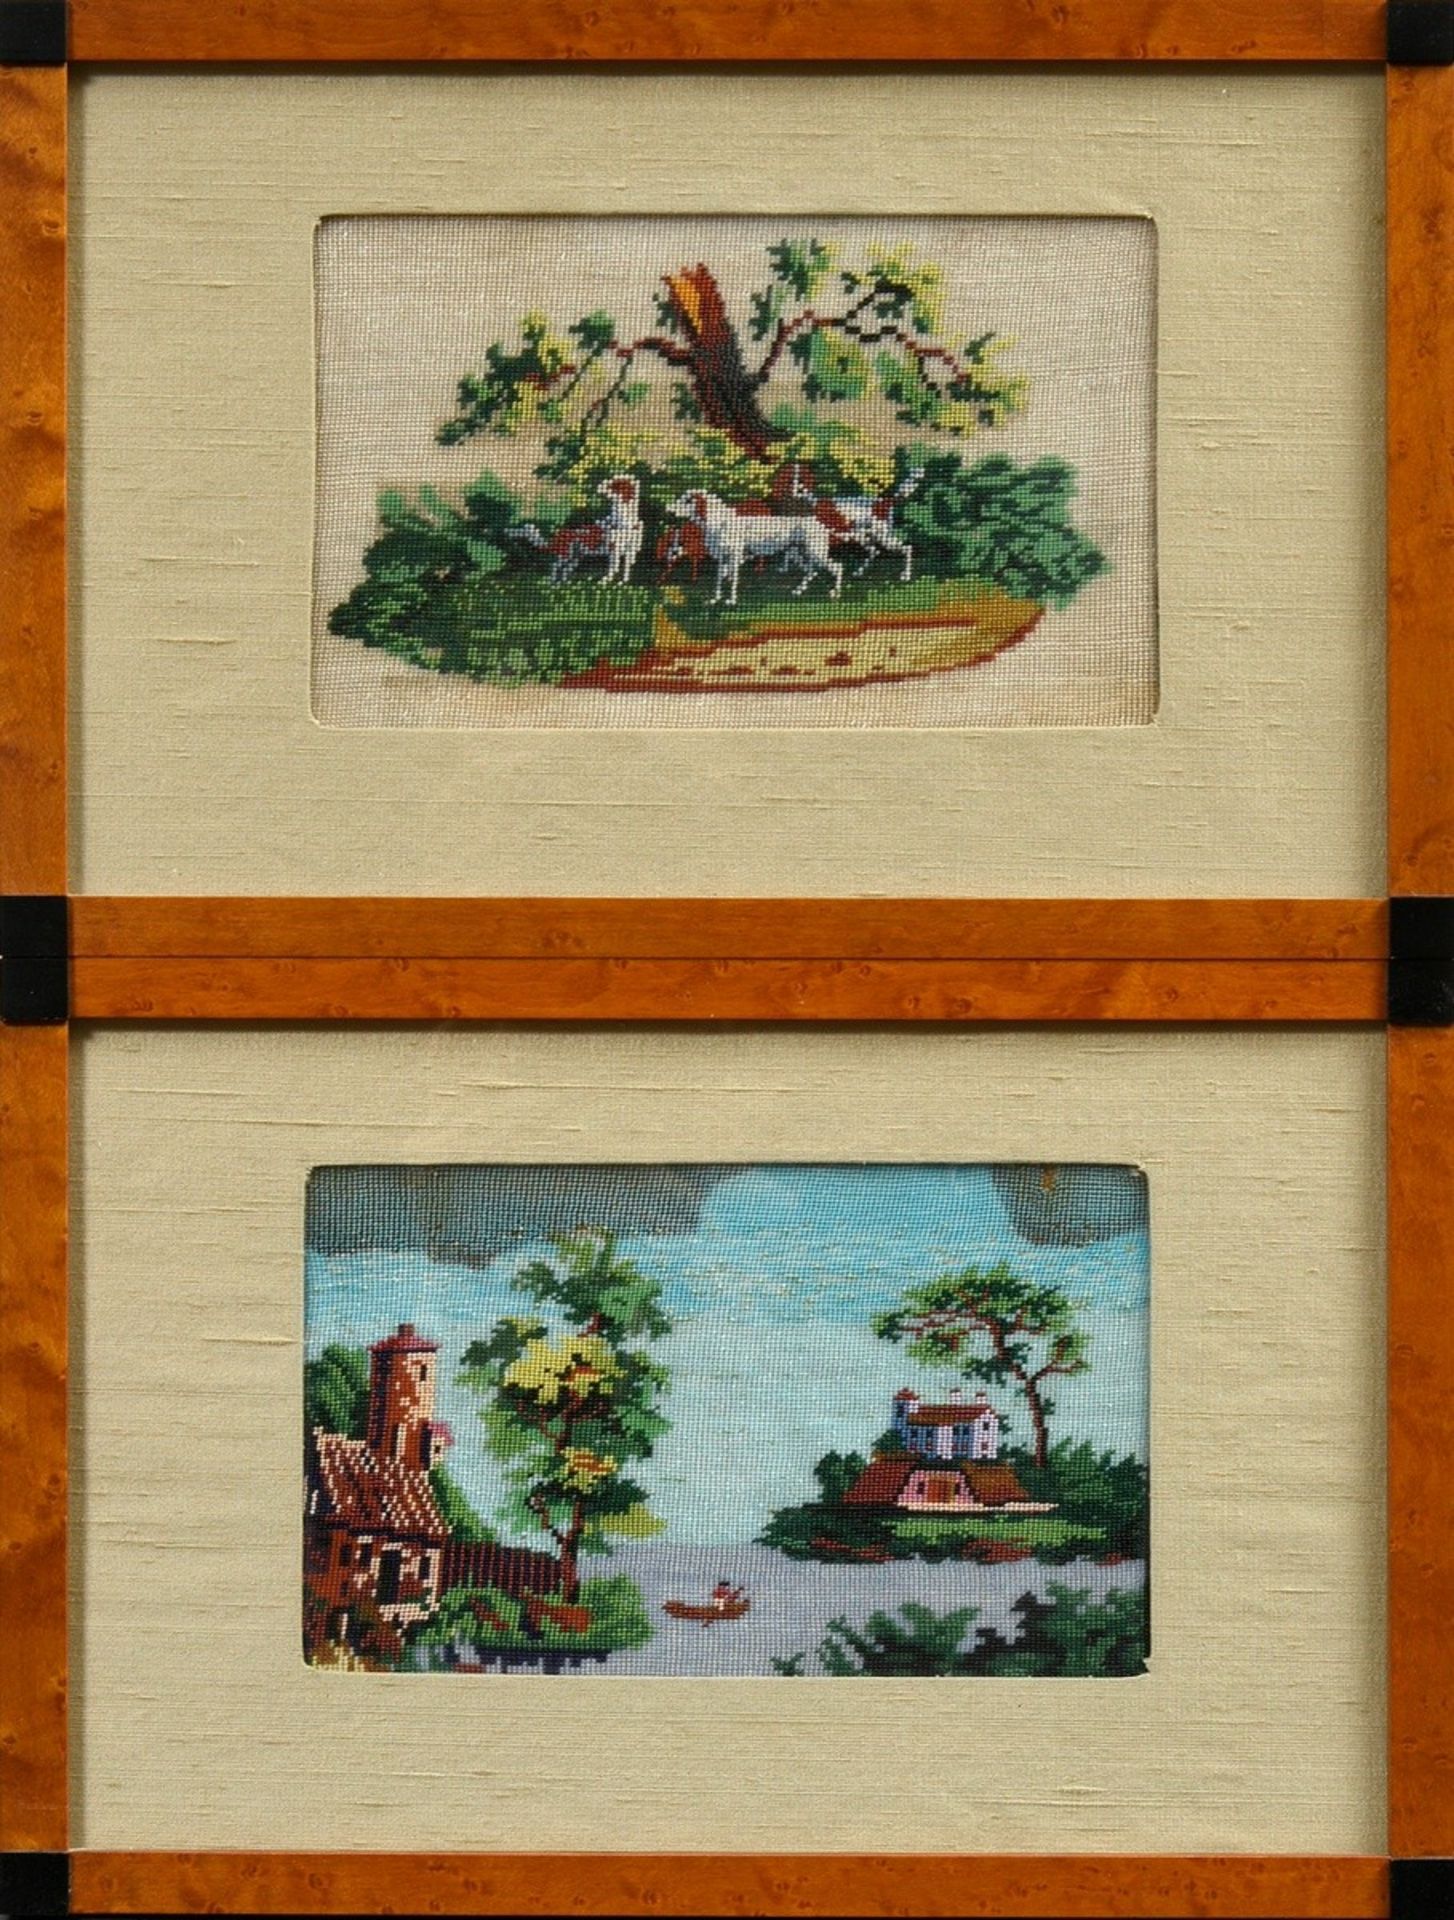 2 Fine pearl embroidery pictures "Hunting dog pack under tree" and "Seascape with buildings", proba